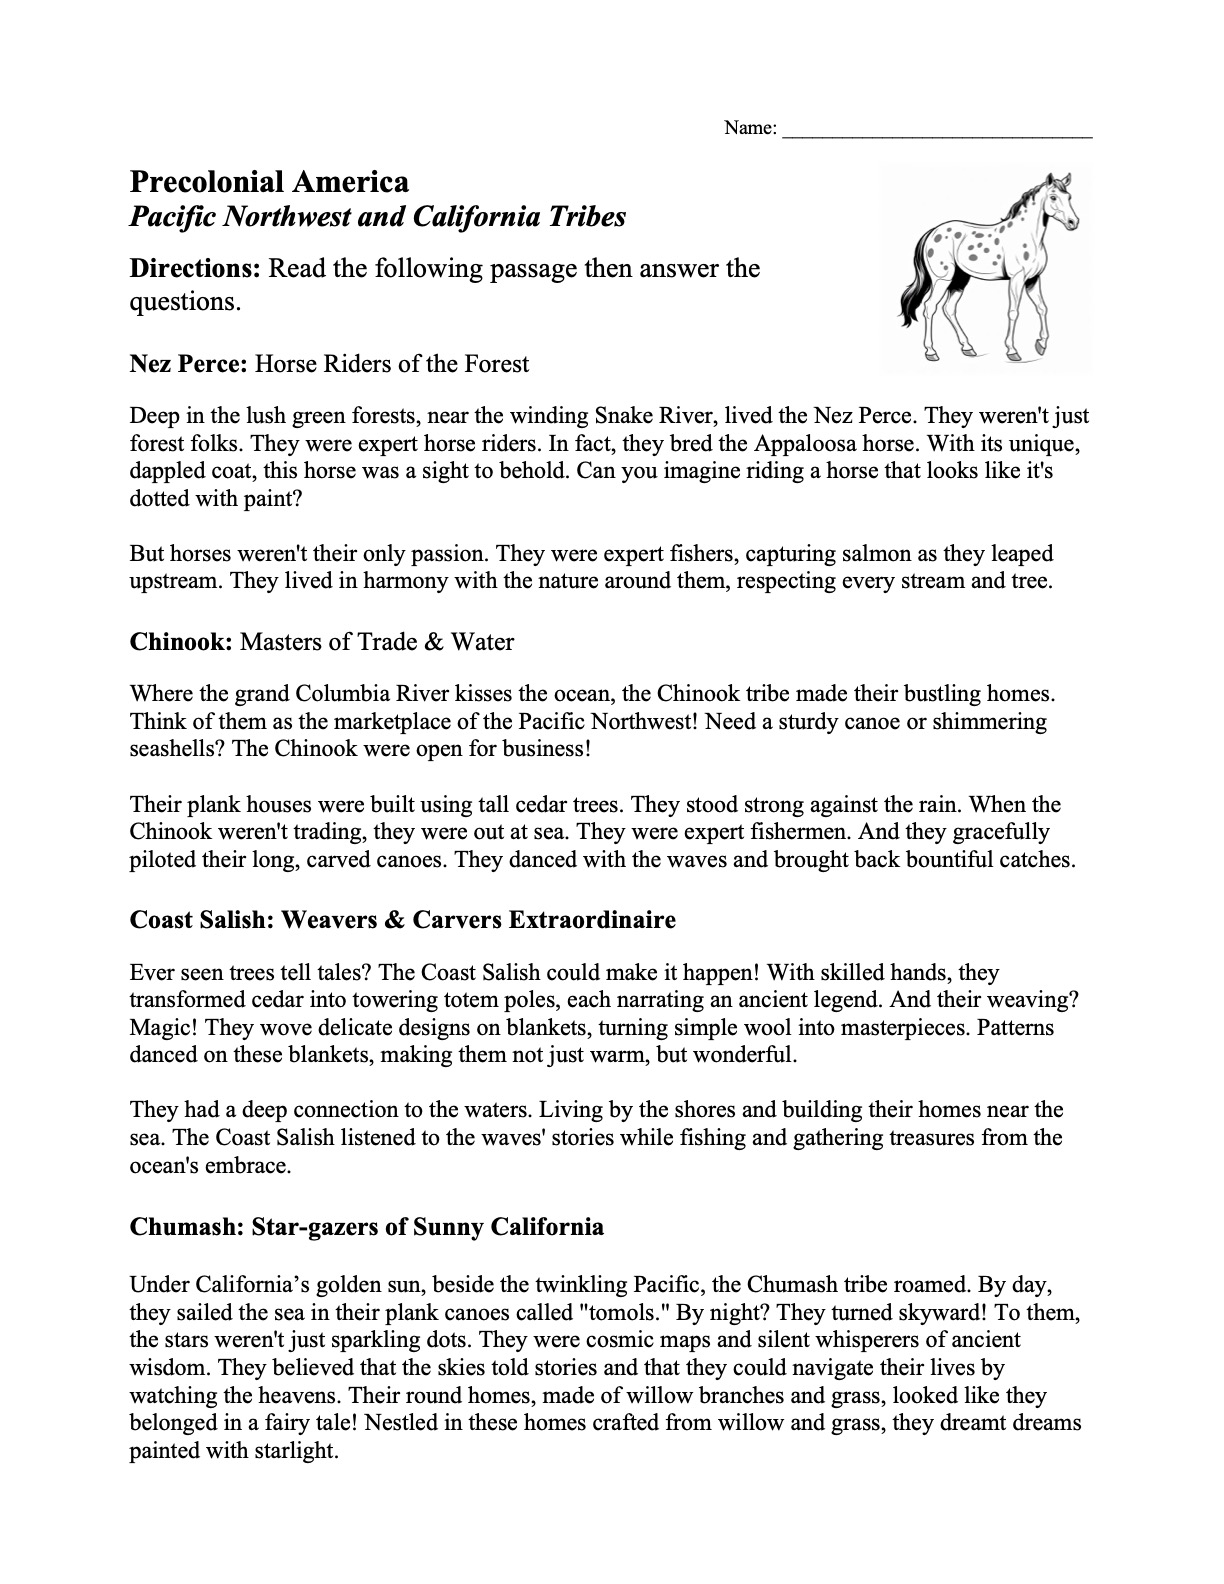 This is a preview image of our Pacific Northwest and California Tribes Worksheet. Click on it to enlarge this image and view the source file.